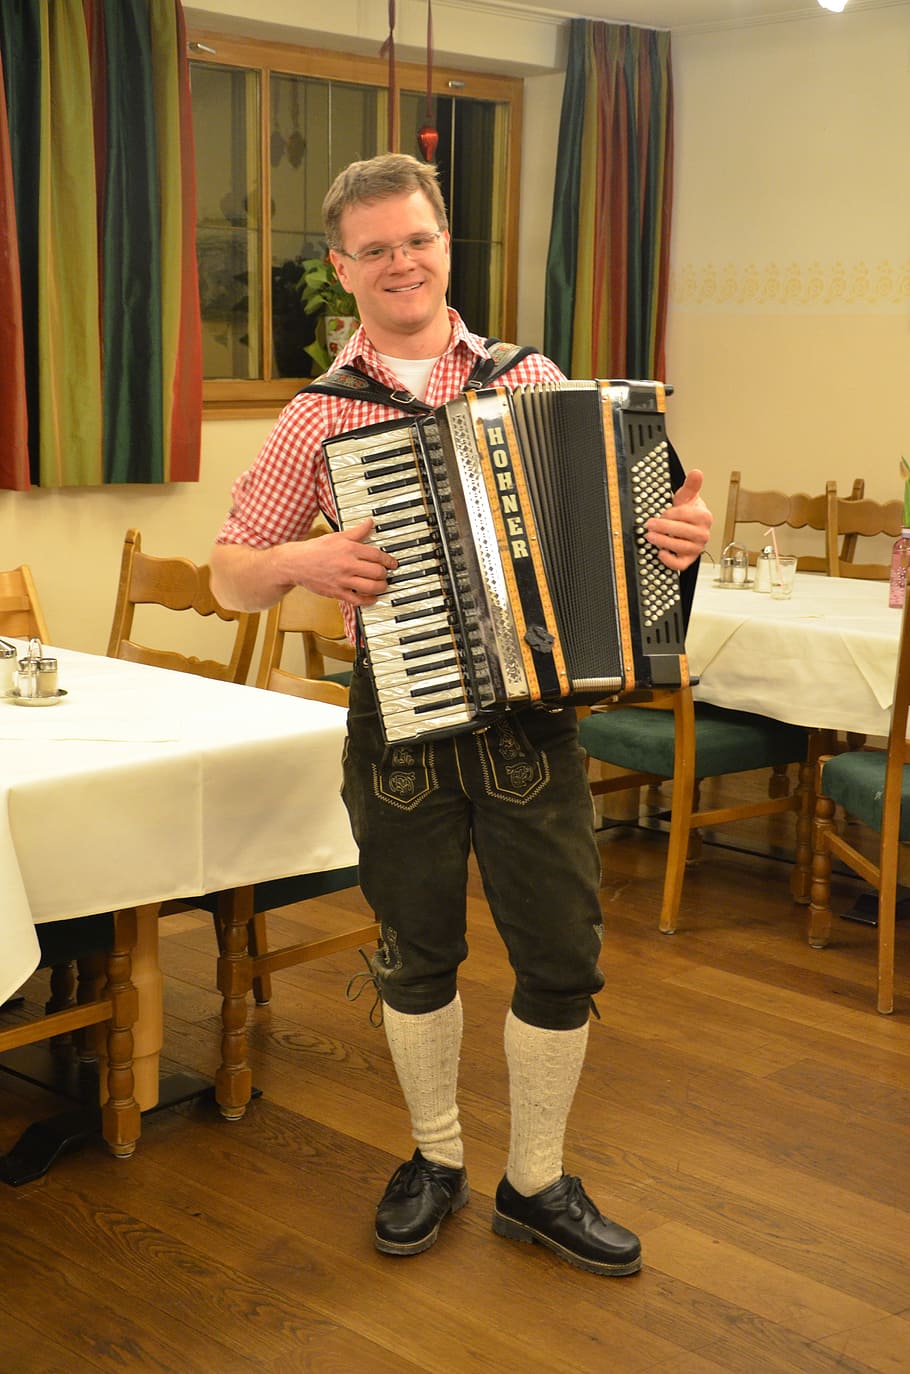 Accordion, Musician, Instrument, Austria, folk music, musical Instrument, music, people, playing, performance